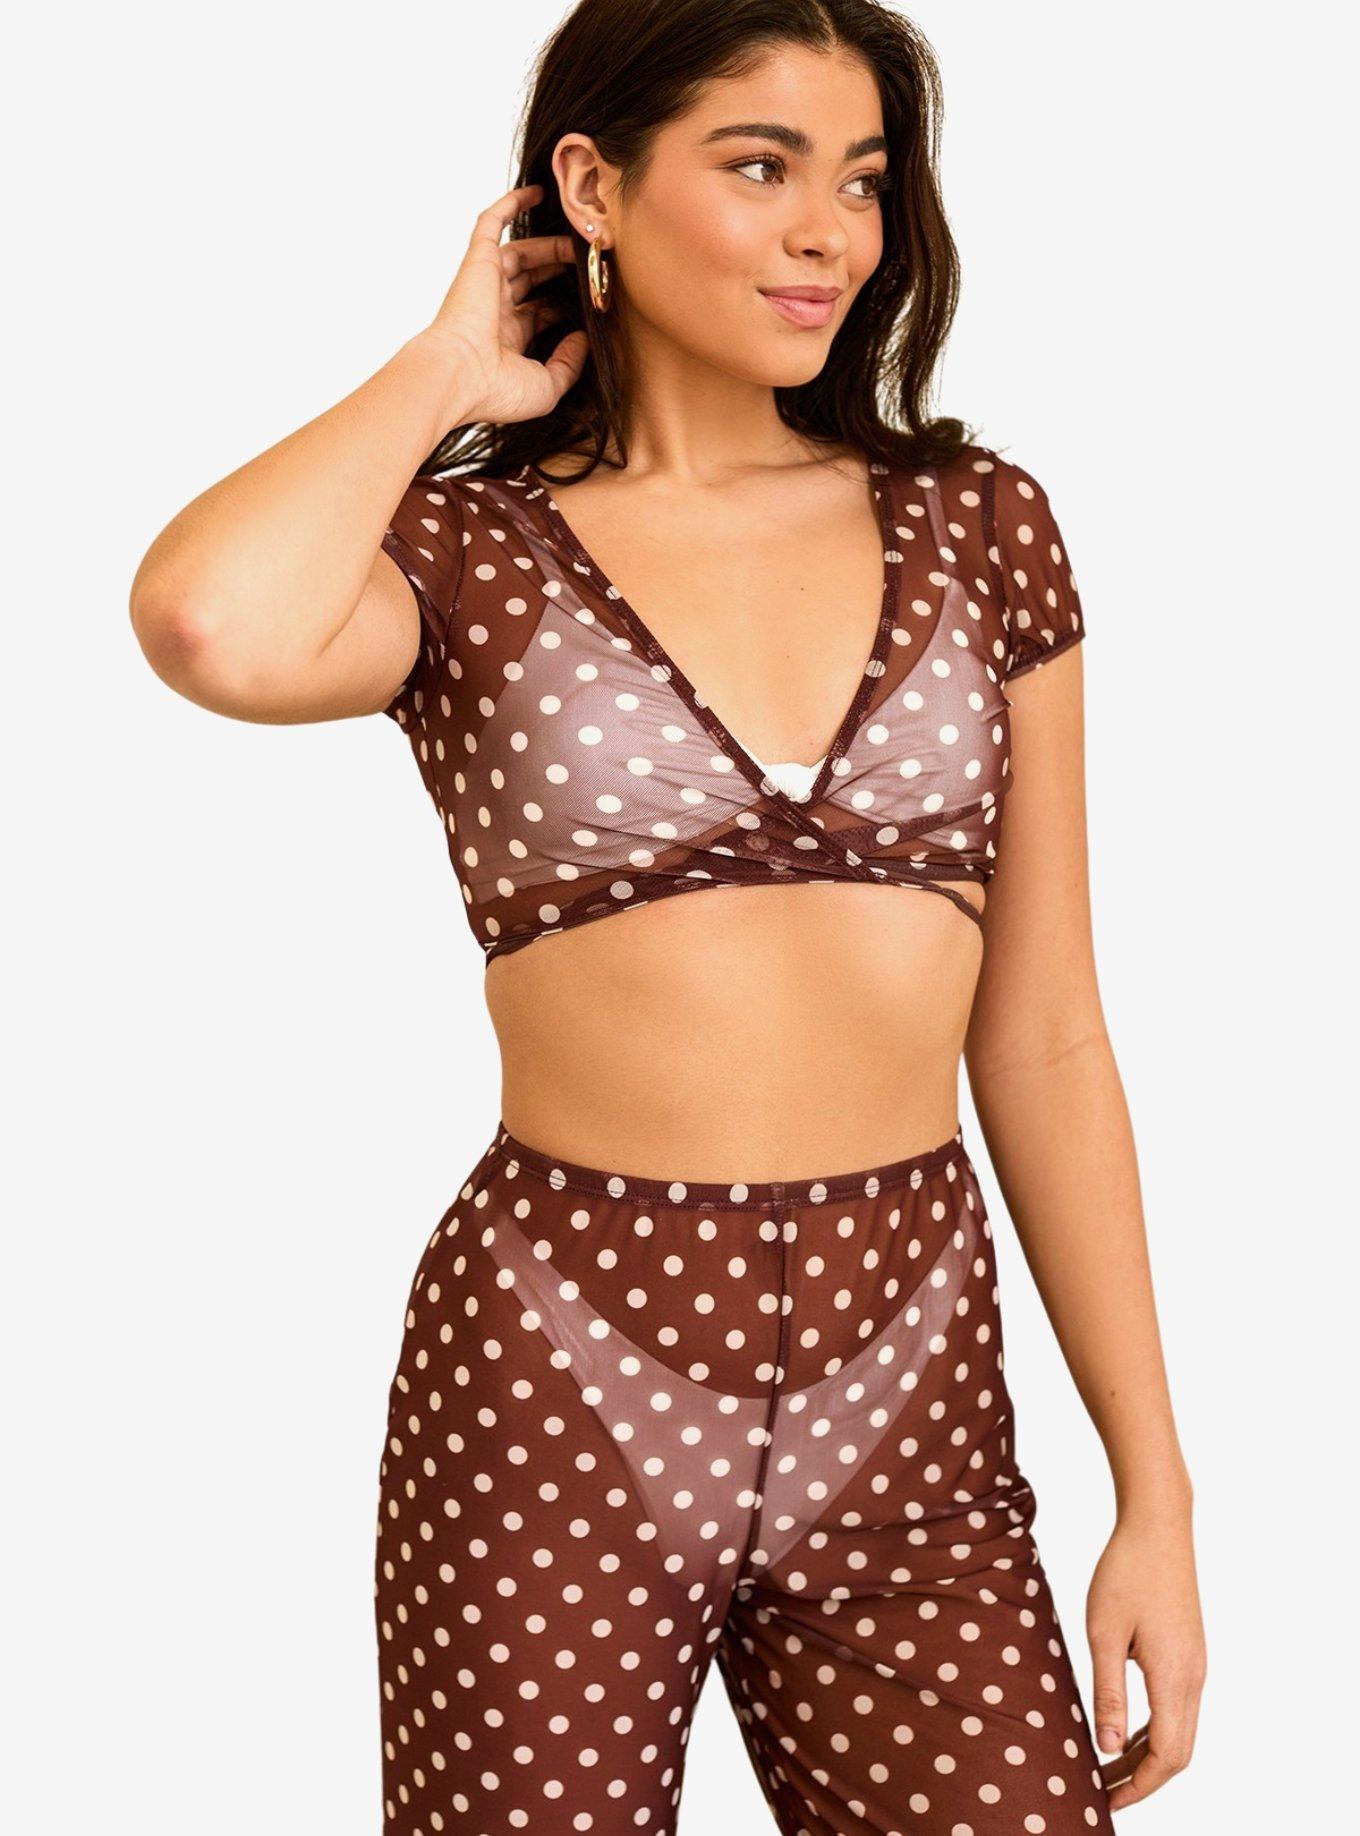 Dippin' Daisy's Cher Swim Cover-Up Top Dotted Brown, BROWN, hi-res